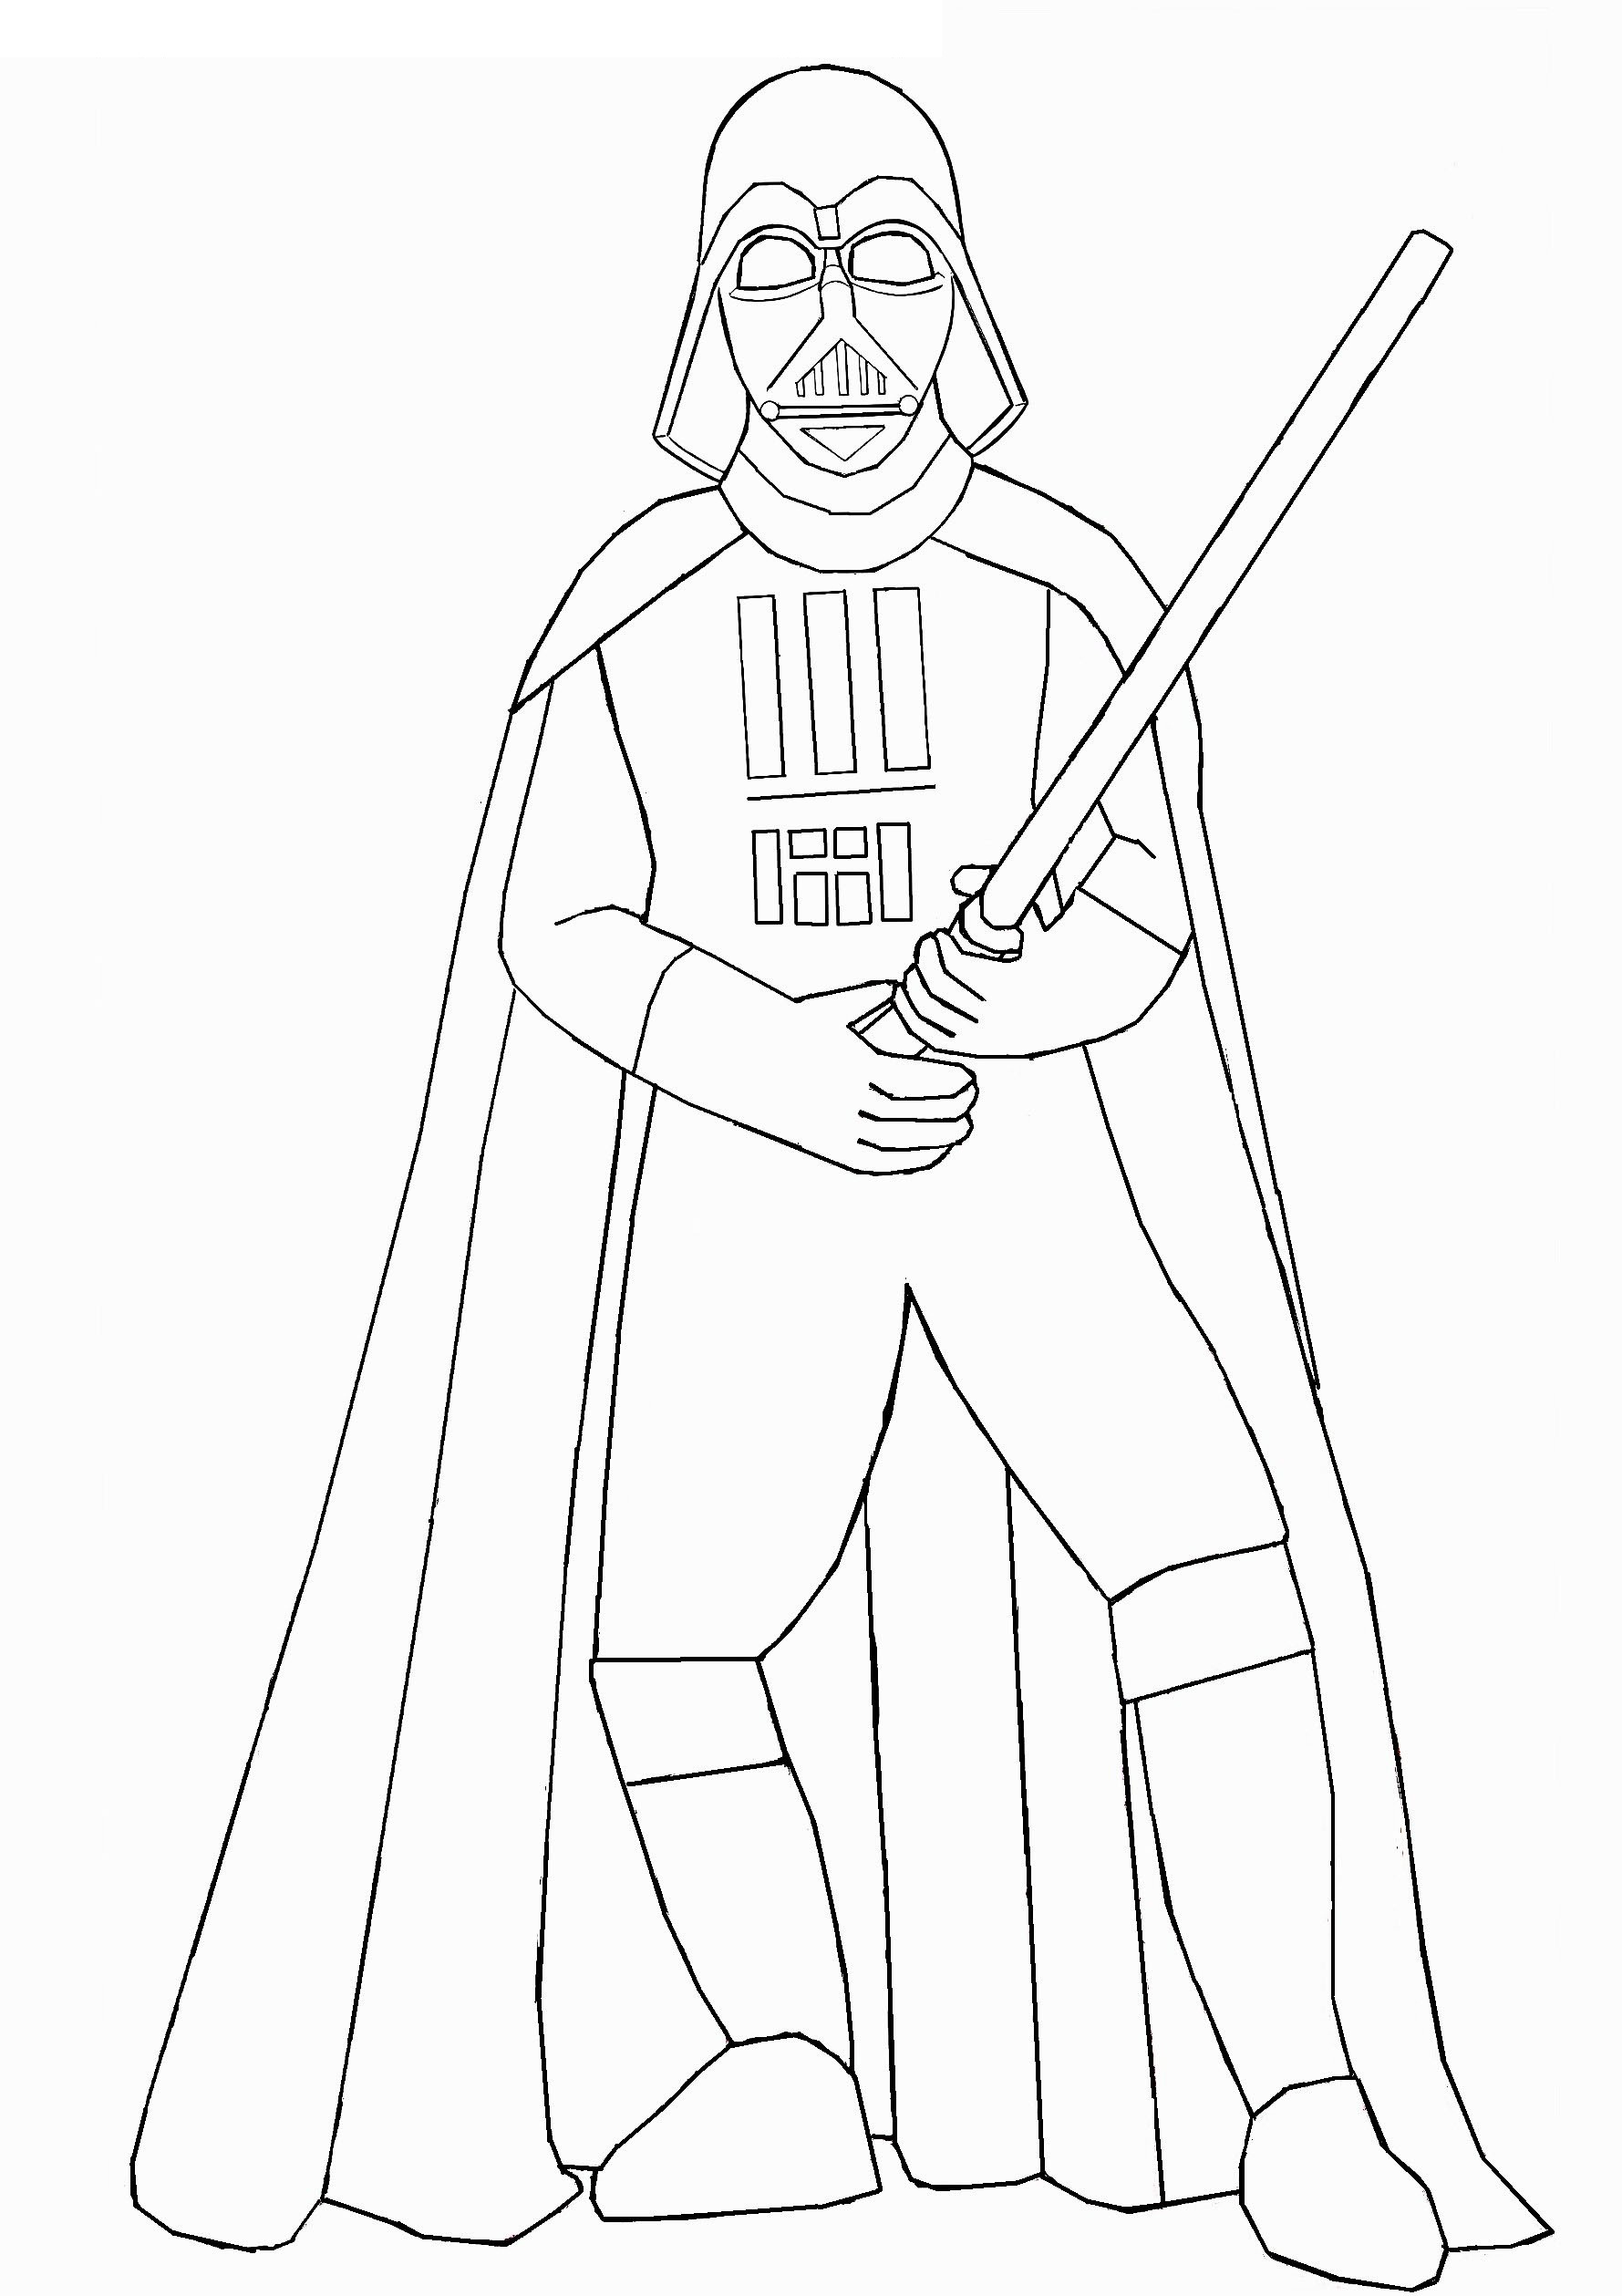 Download Darth Vader Holding Lightsaber Coloring Page - Free Printable Coloring Pages for Kids